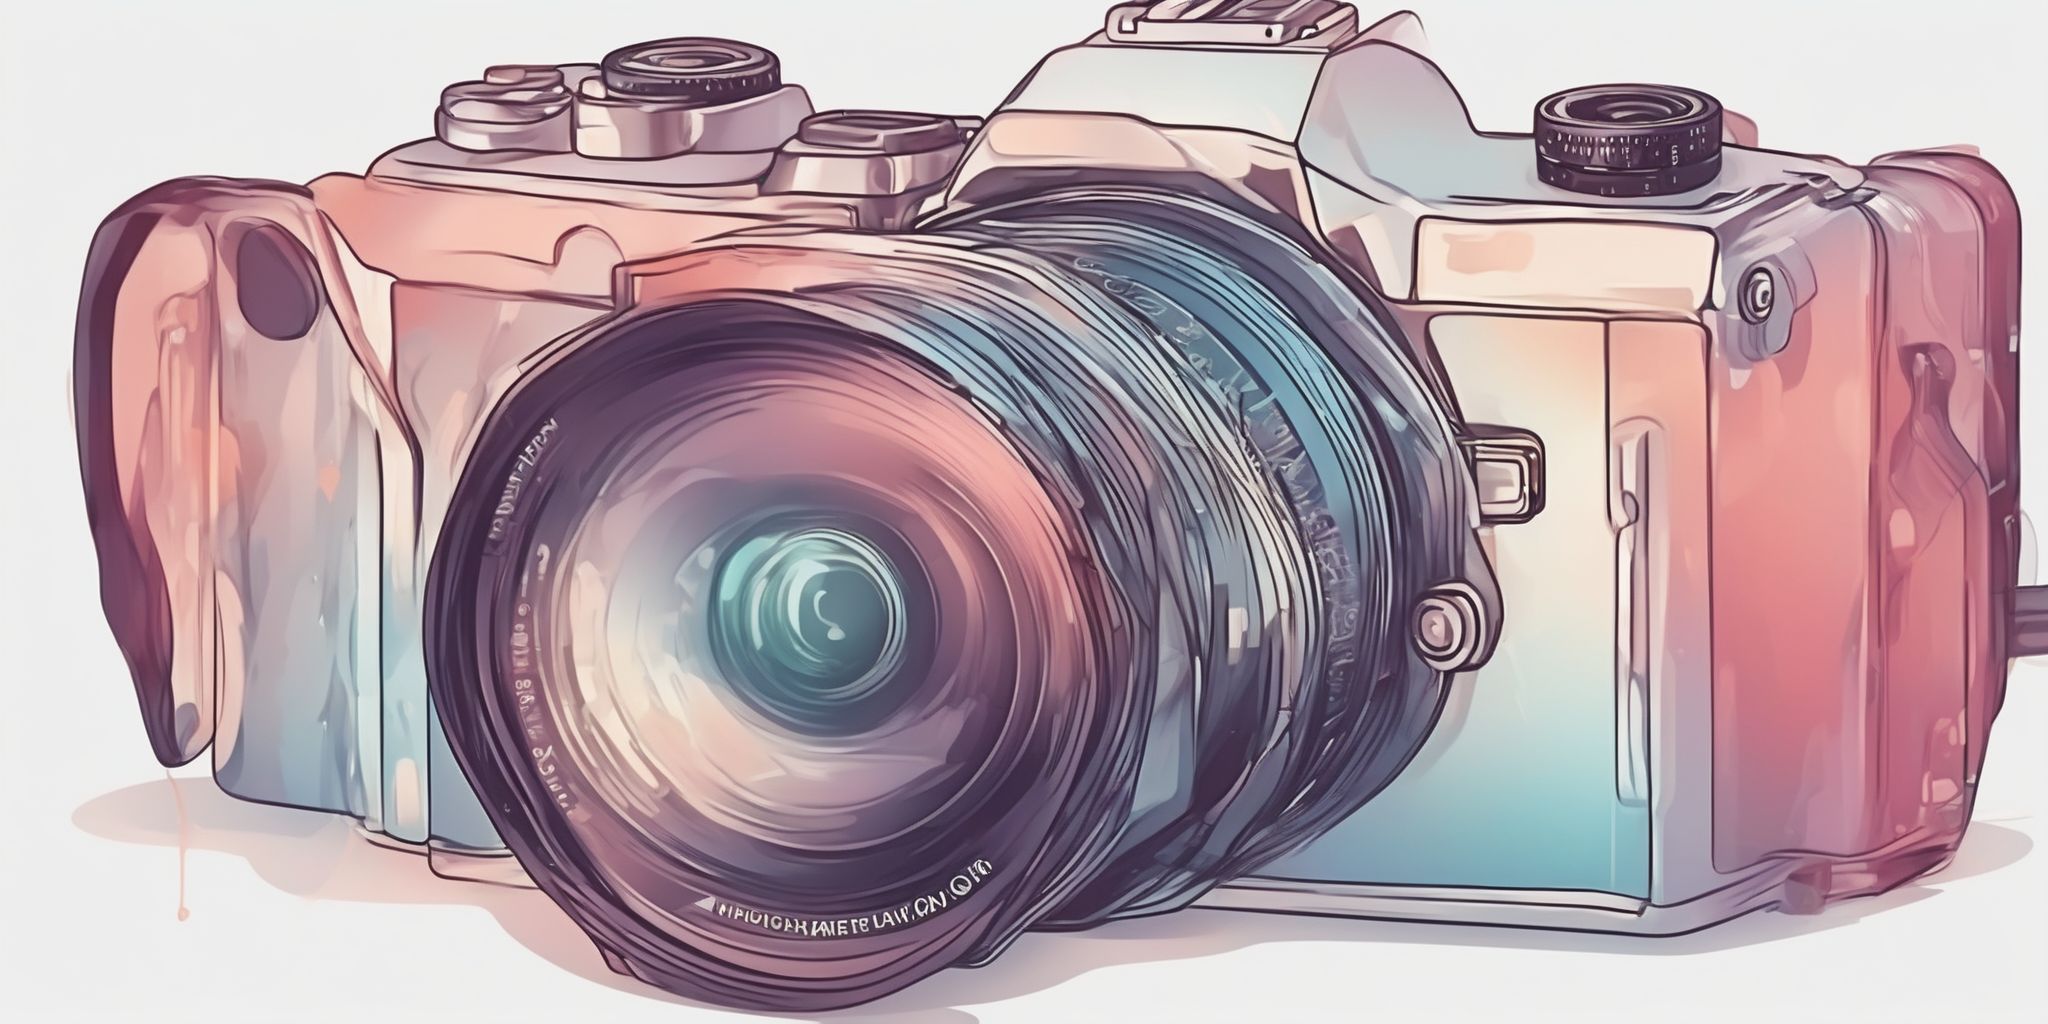 Camera in illustration style with gradients and white background